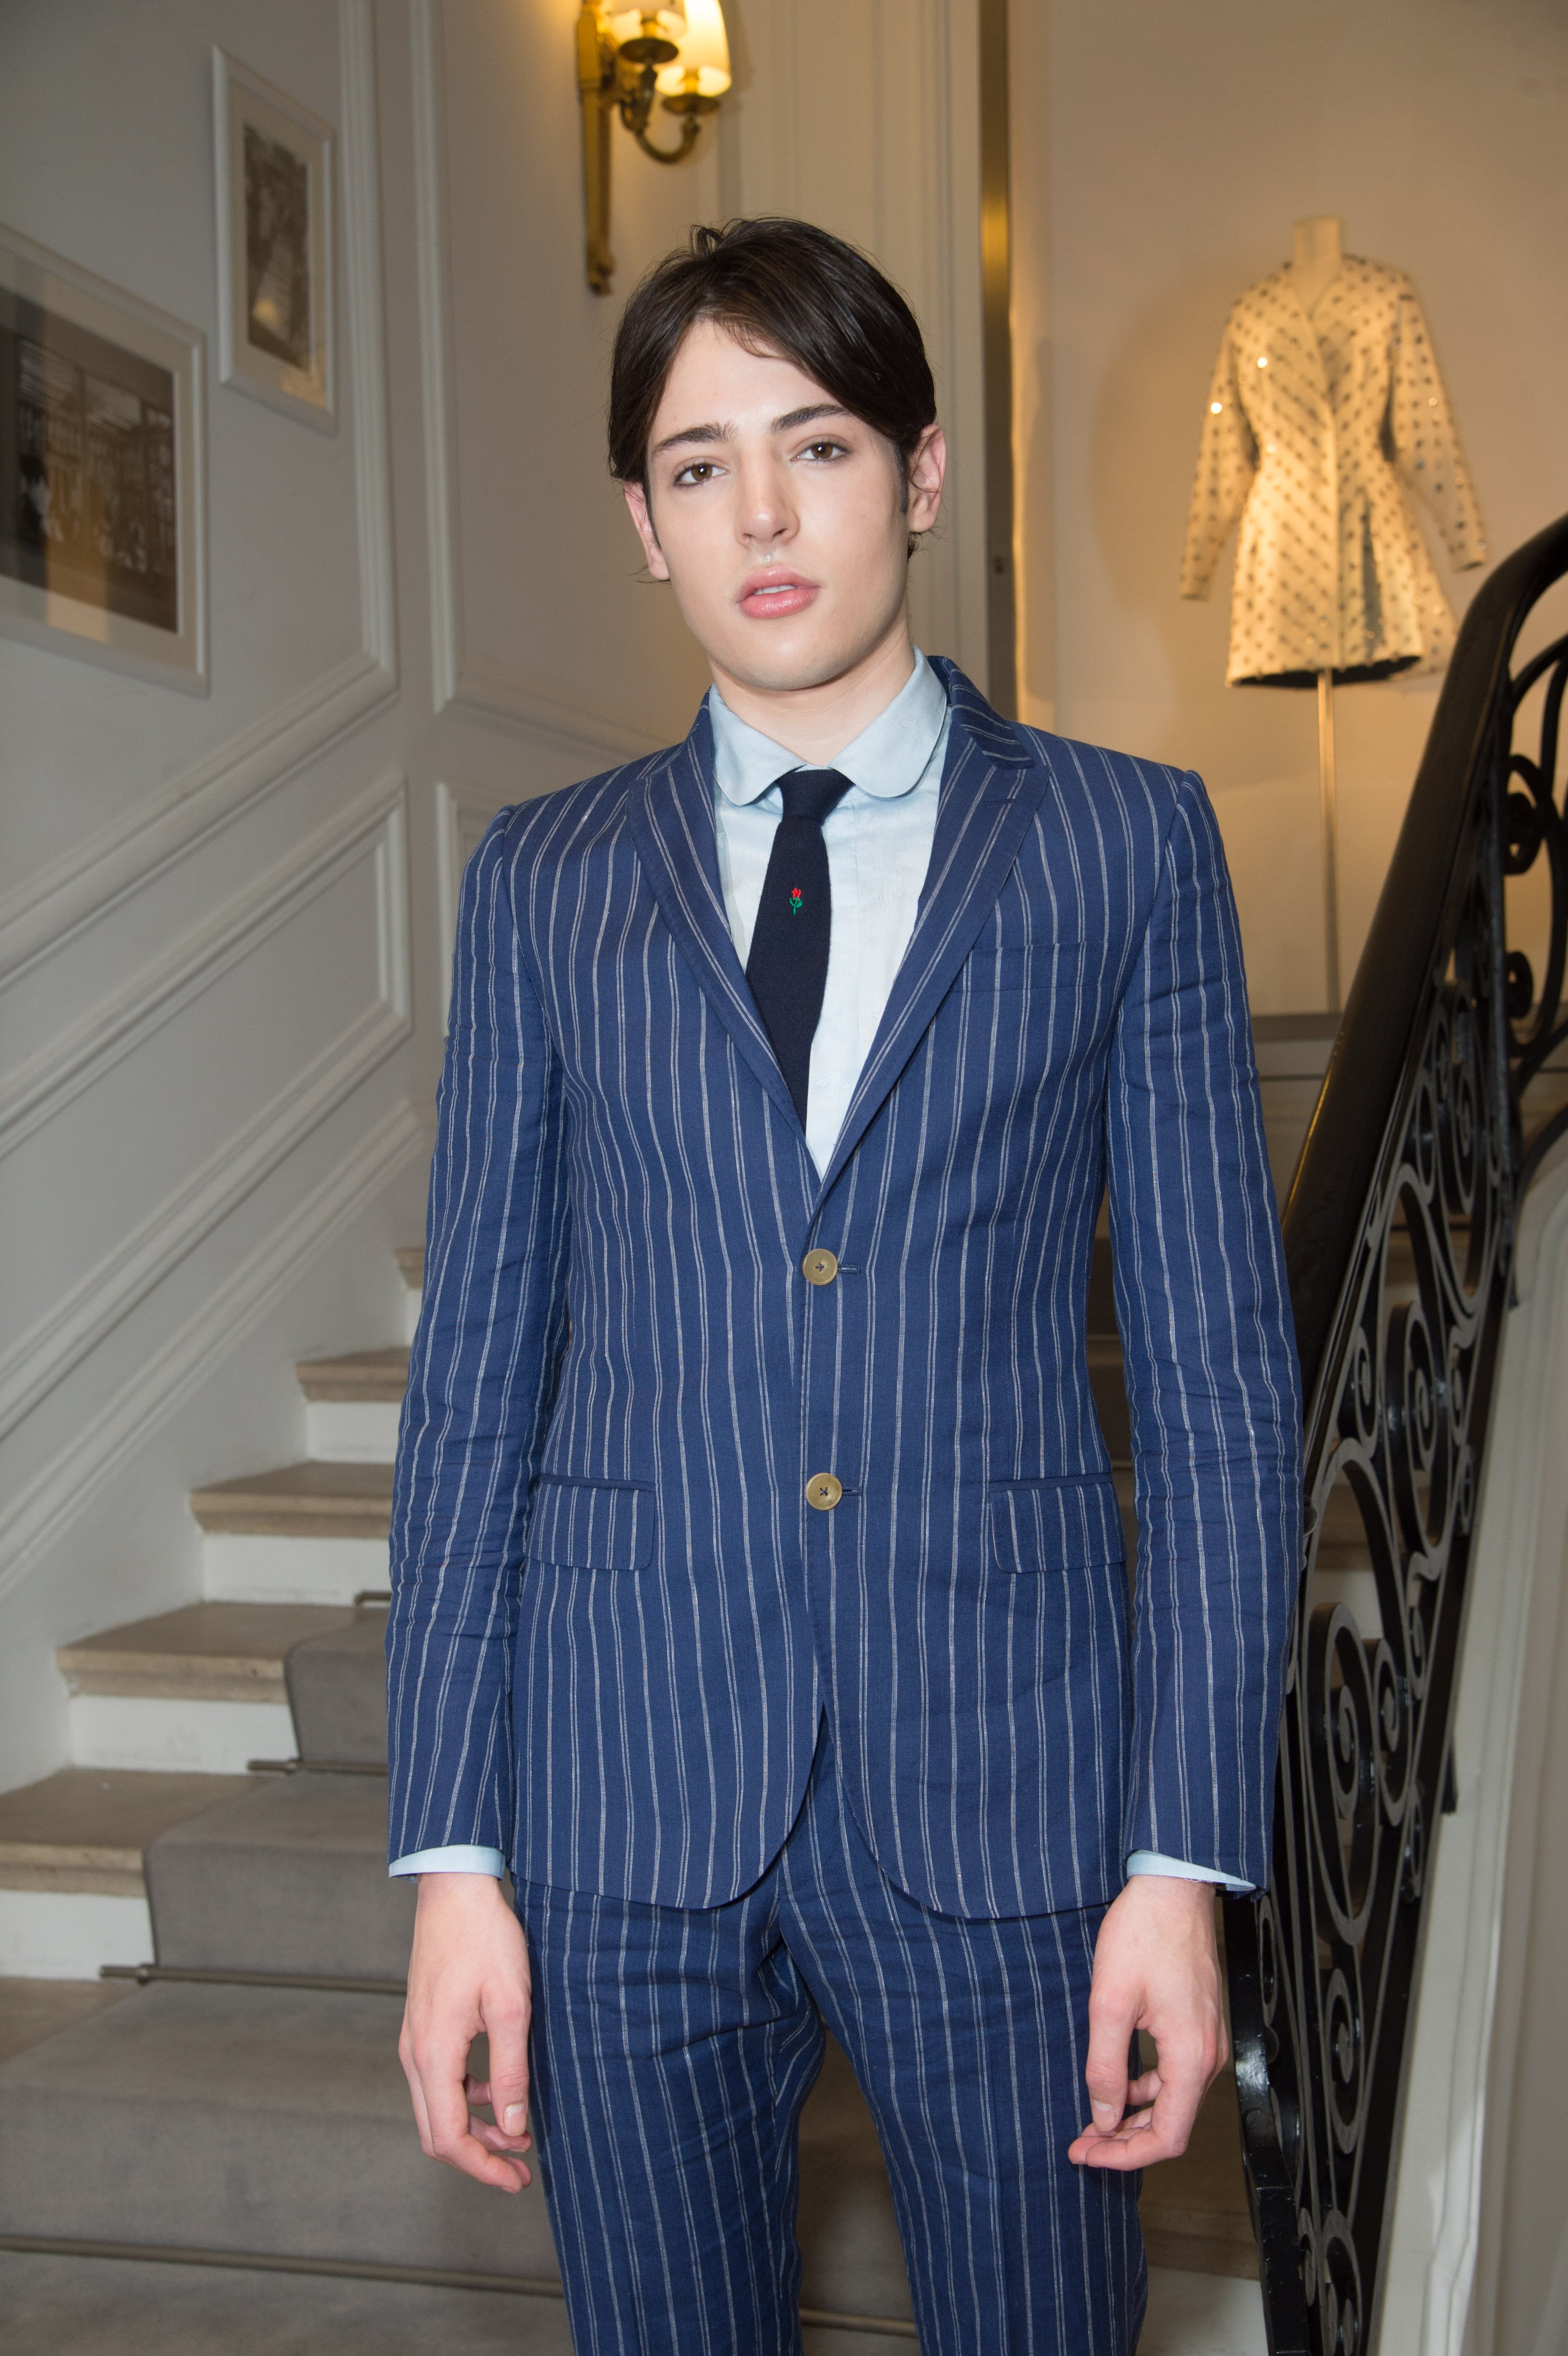 Harry Brant, 24, died of an accidental drug overdose and was found on Sunday, 17 January, 2020. " Photo: Getty Images. 